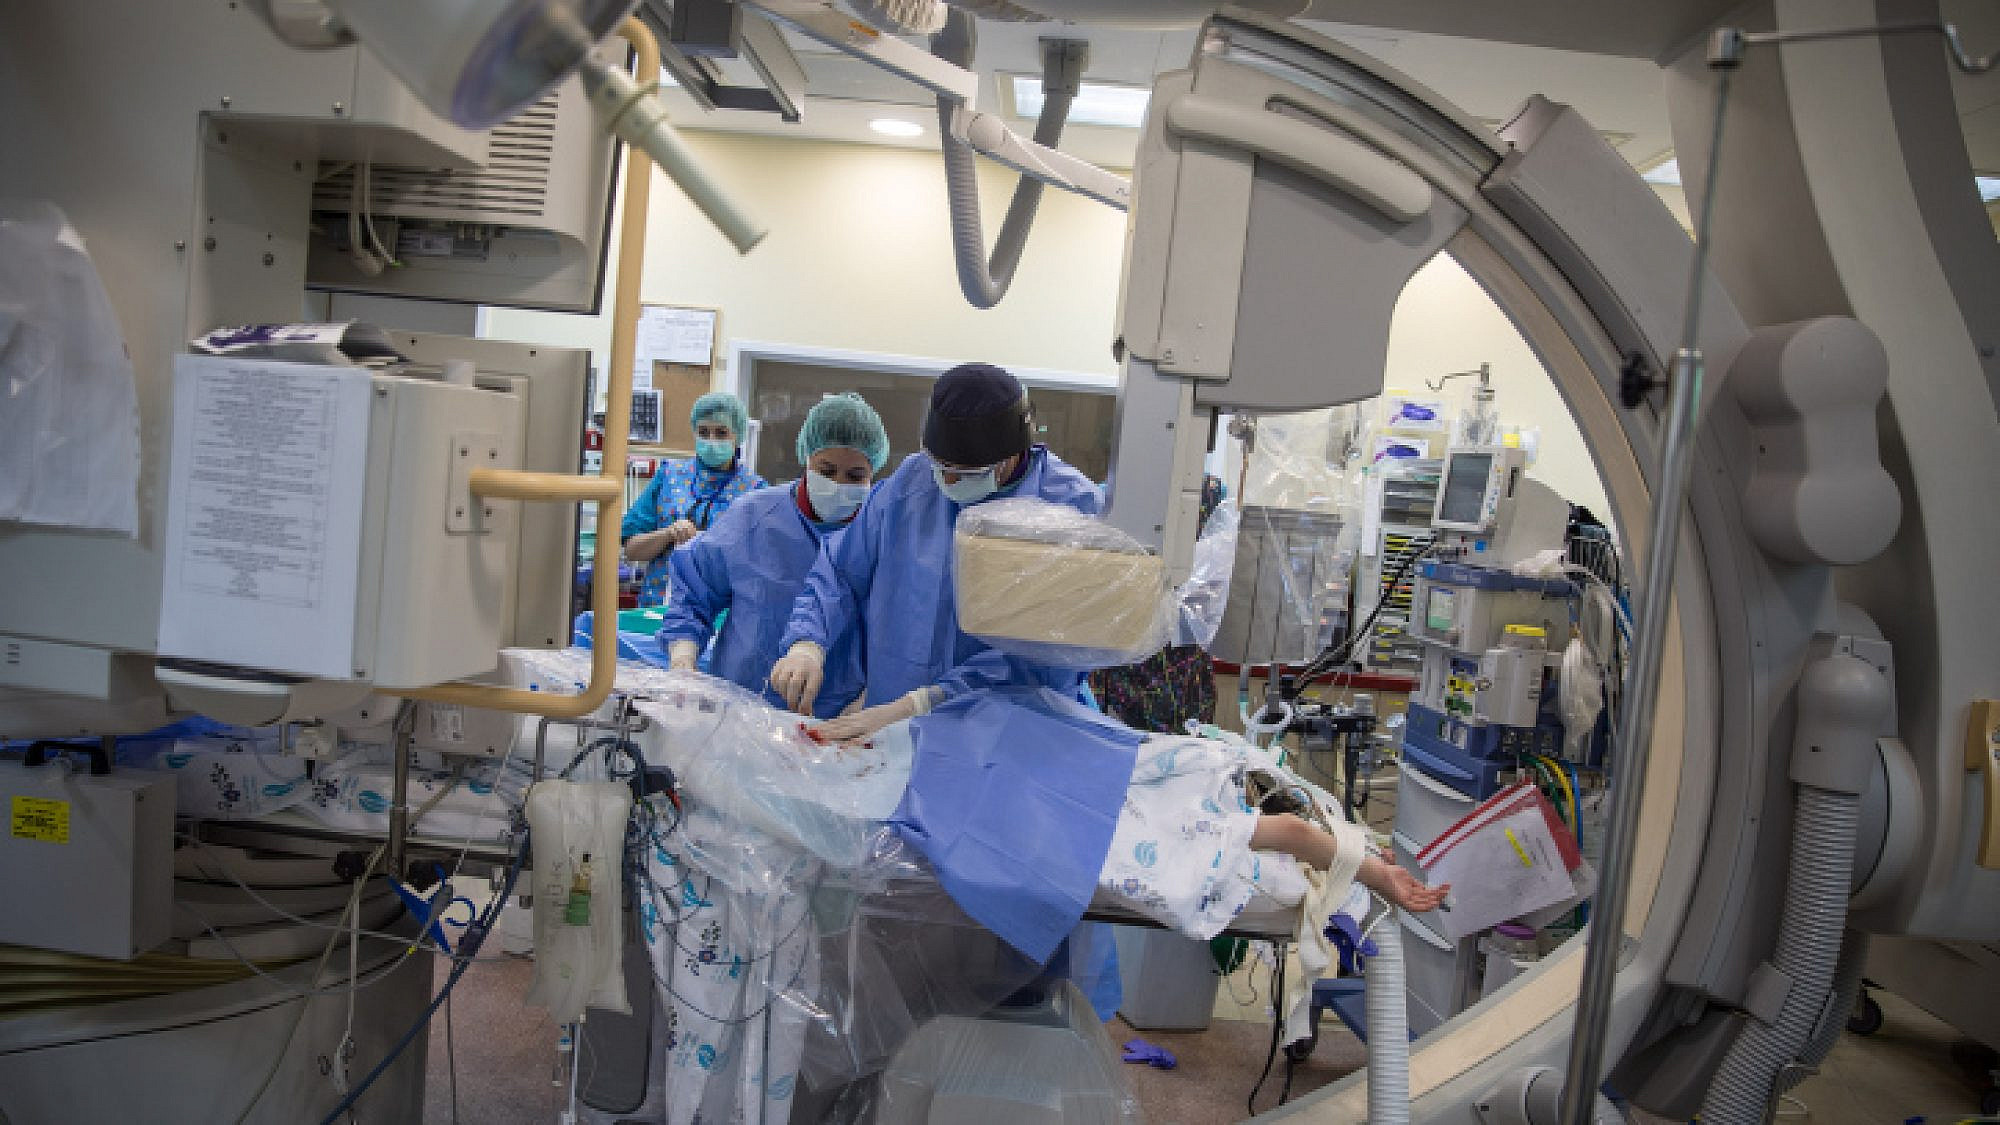 Israeli doctors perform a cardiac catheterization on a young Palestinian girl at the Wolfson Medical Center in the central Israeli city of Holon, on April 11, 2018. Photo by Hadas Parush/Flash90.